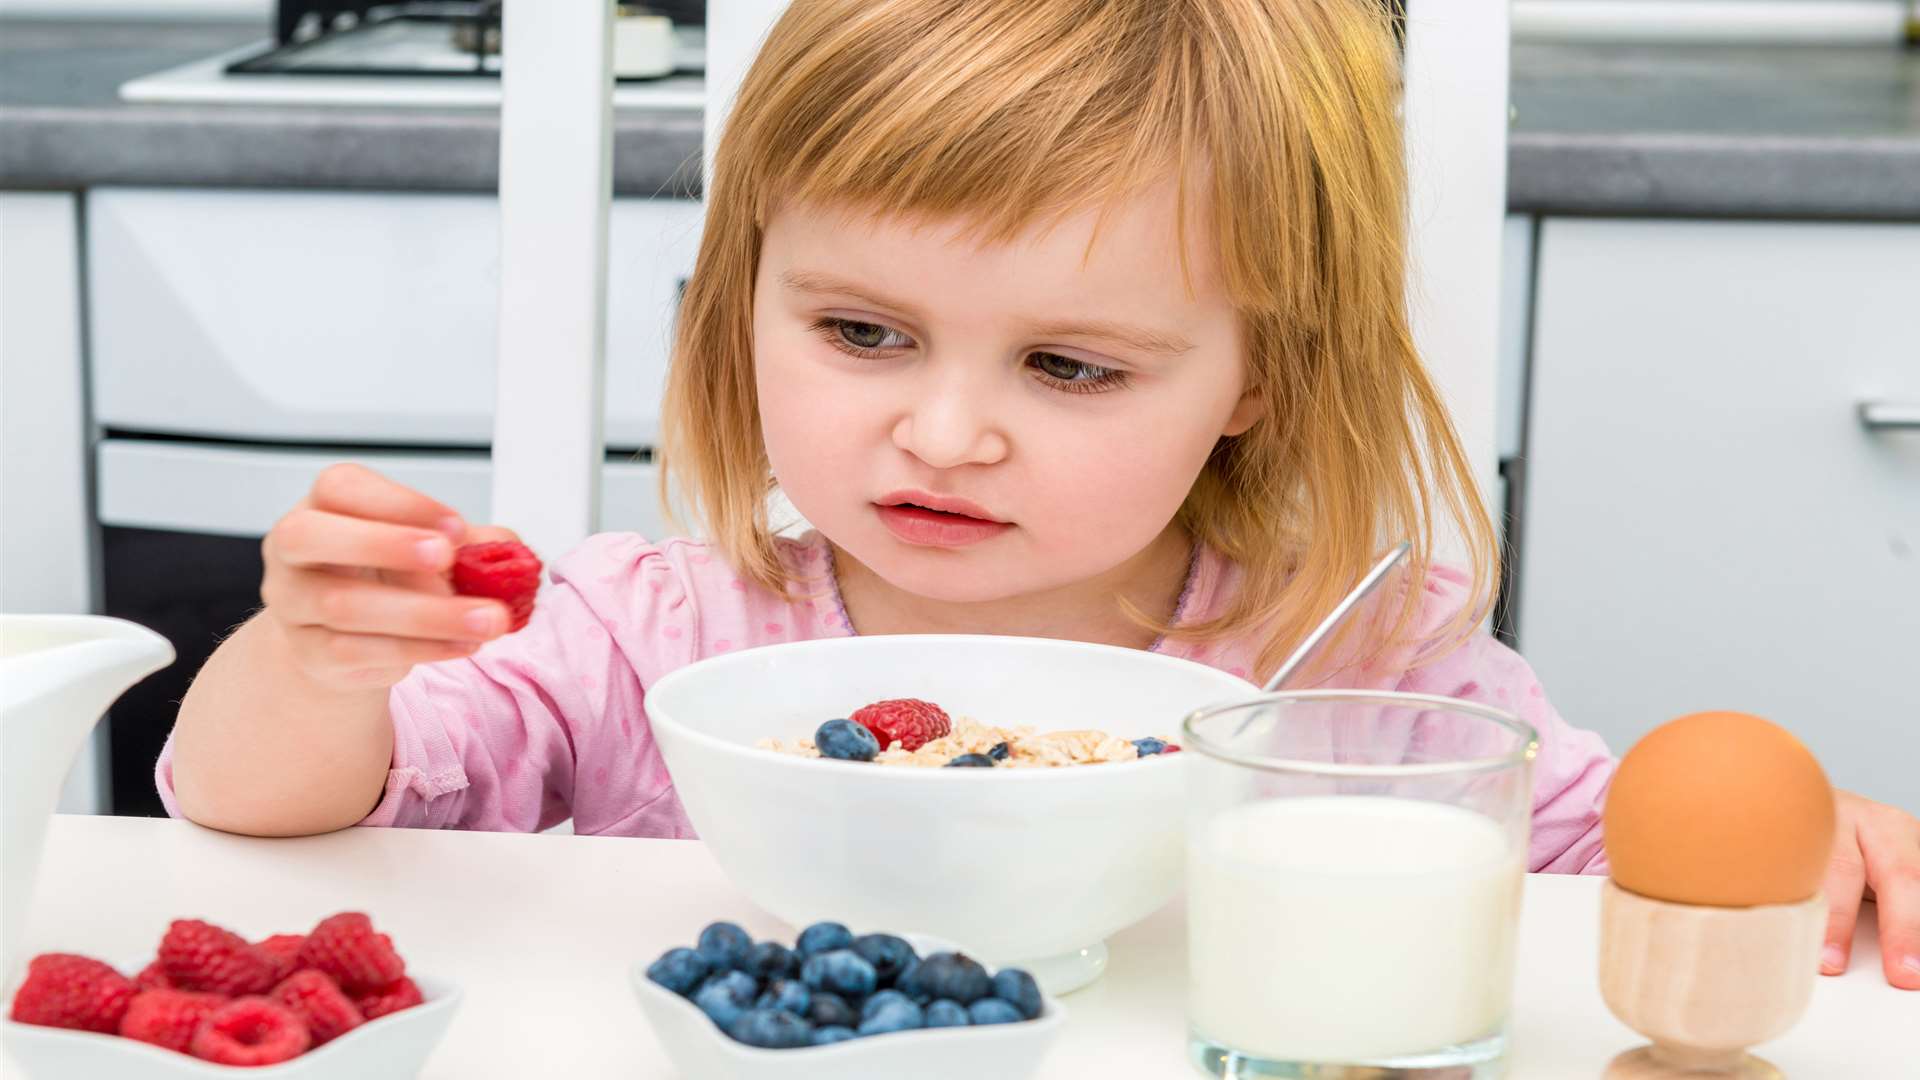 Almost half of parents think their child is missing out on the best nutrition because they’re a fussy eater who’s unwilling to try new foods